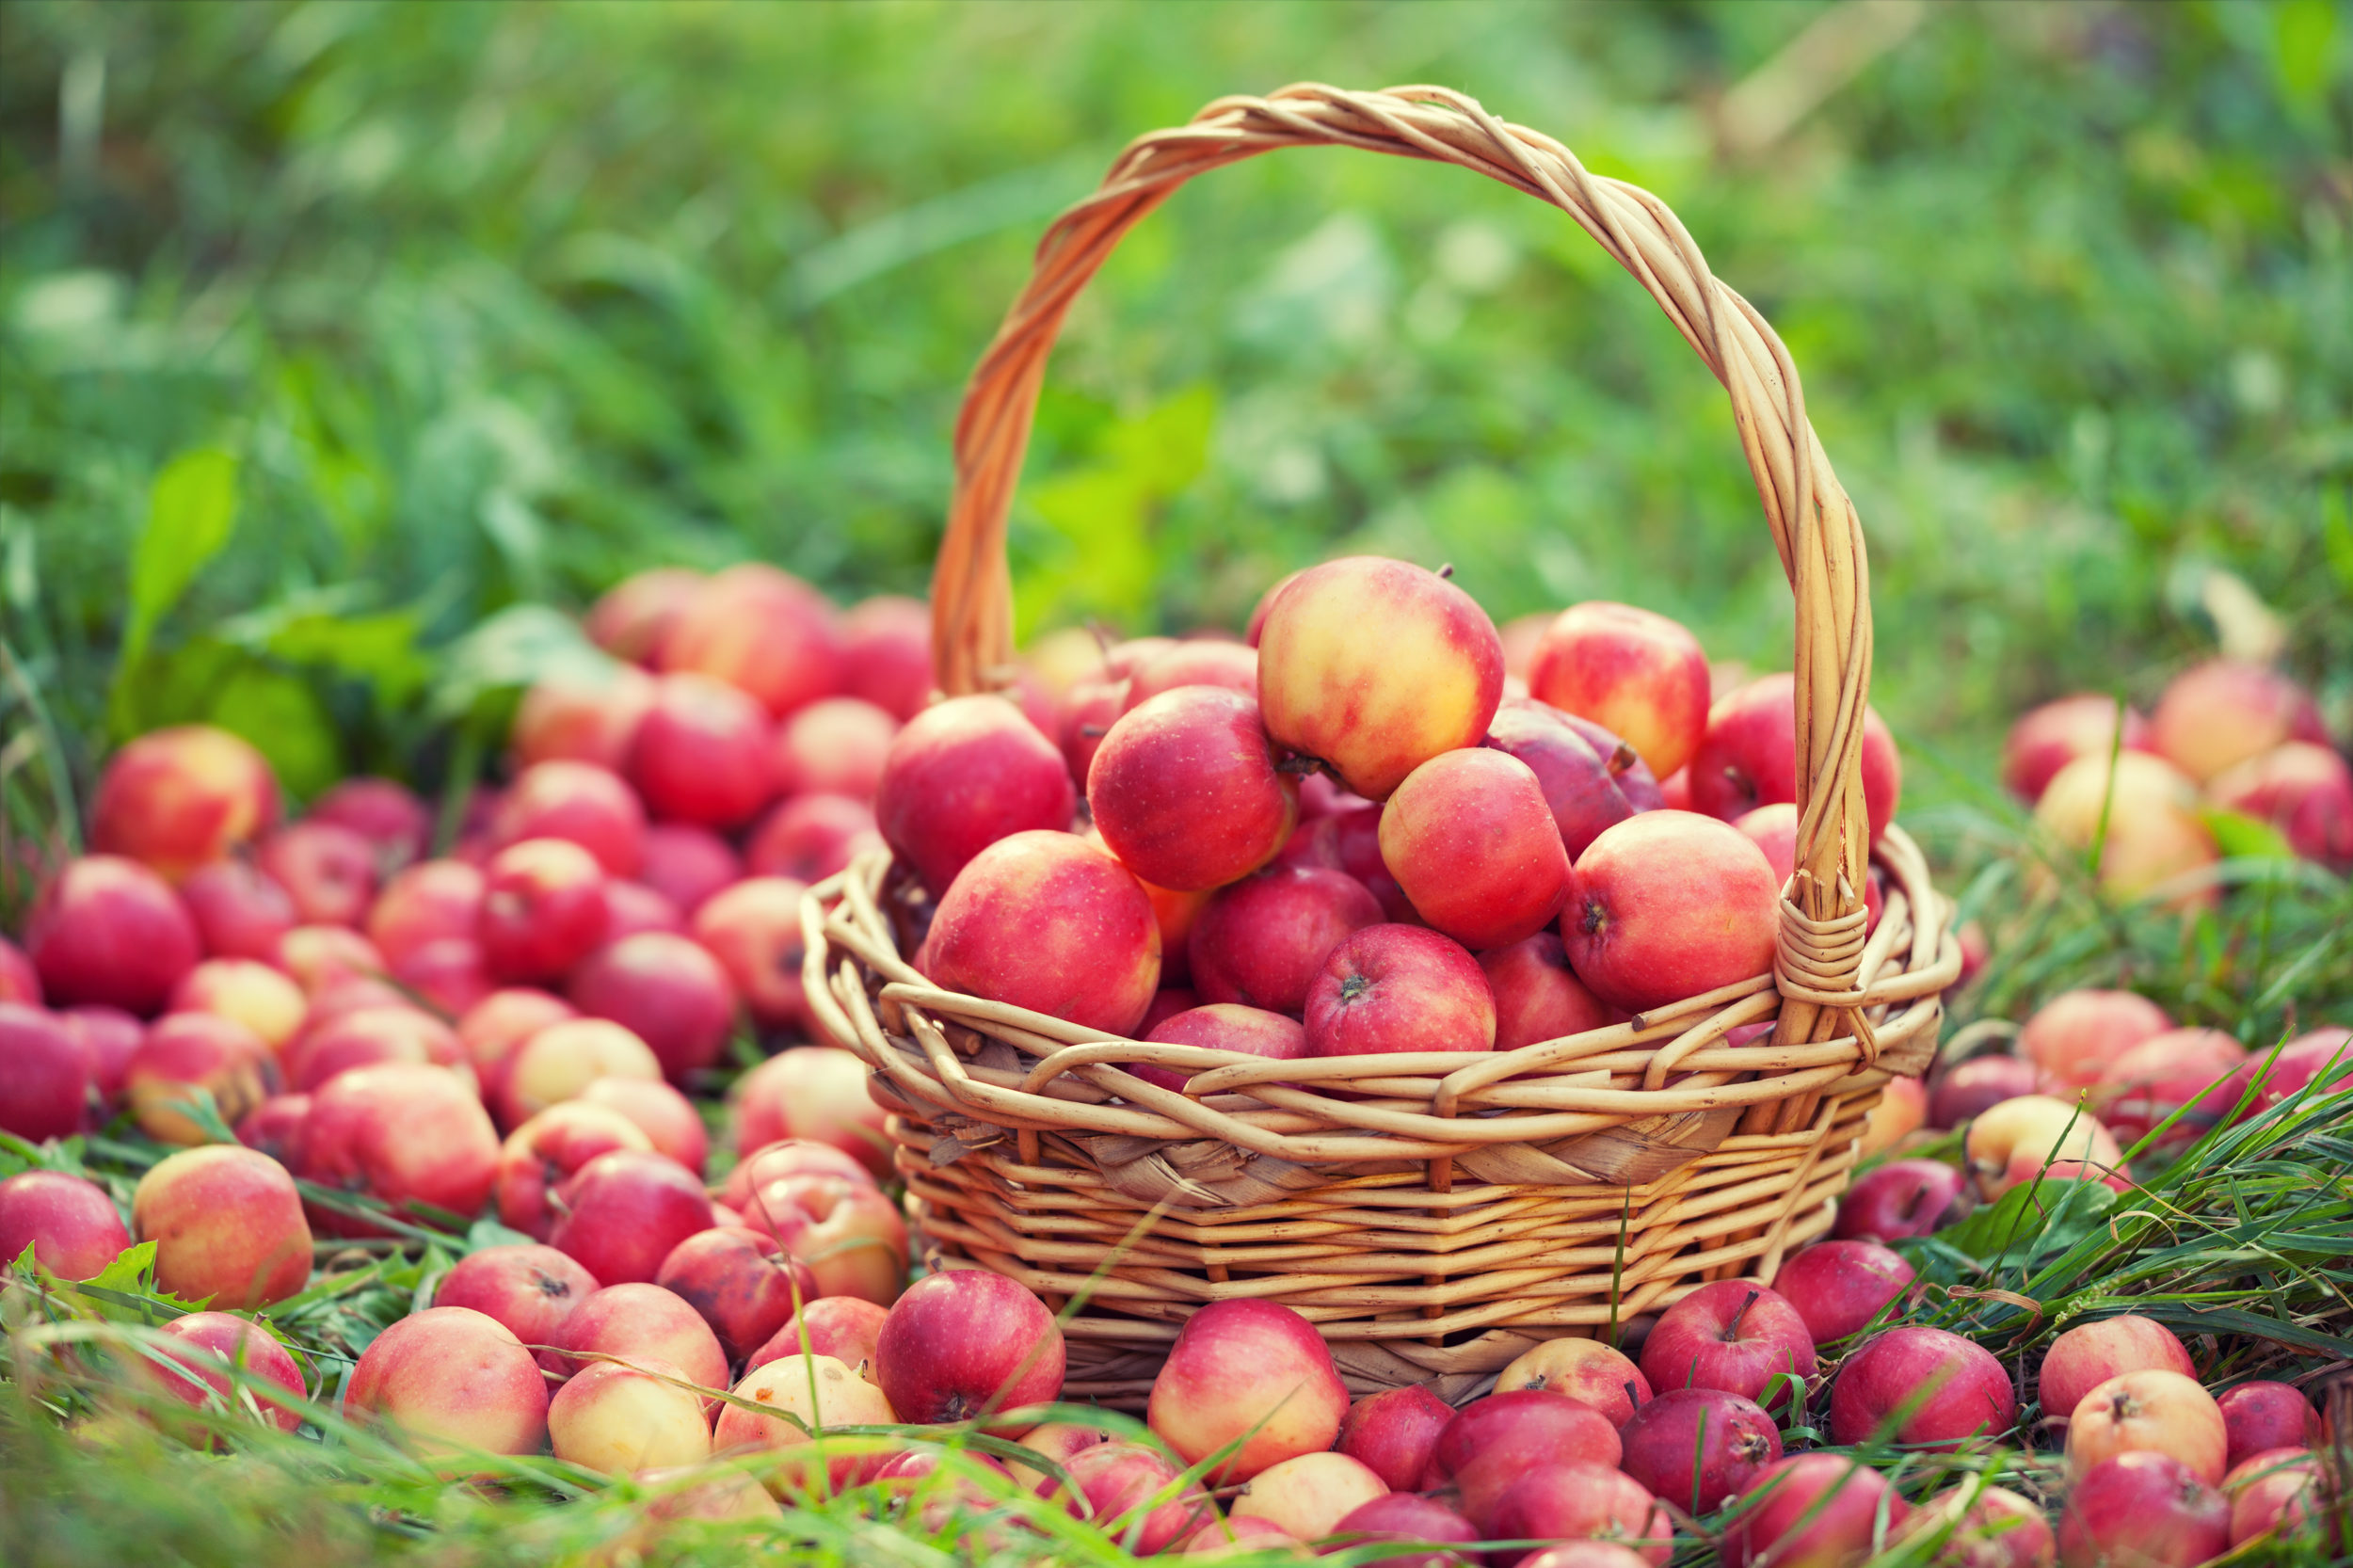 Basket with red apples 